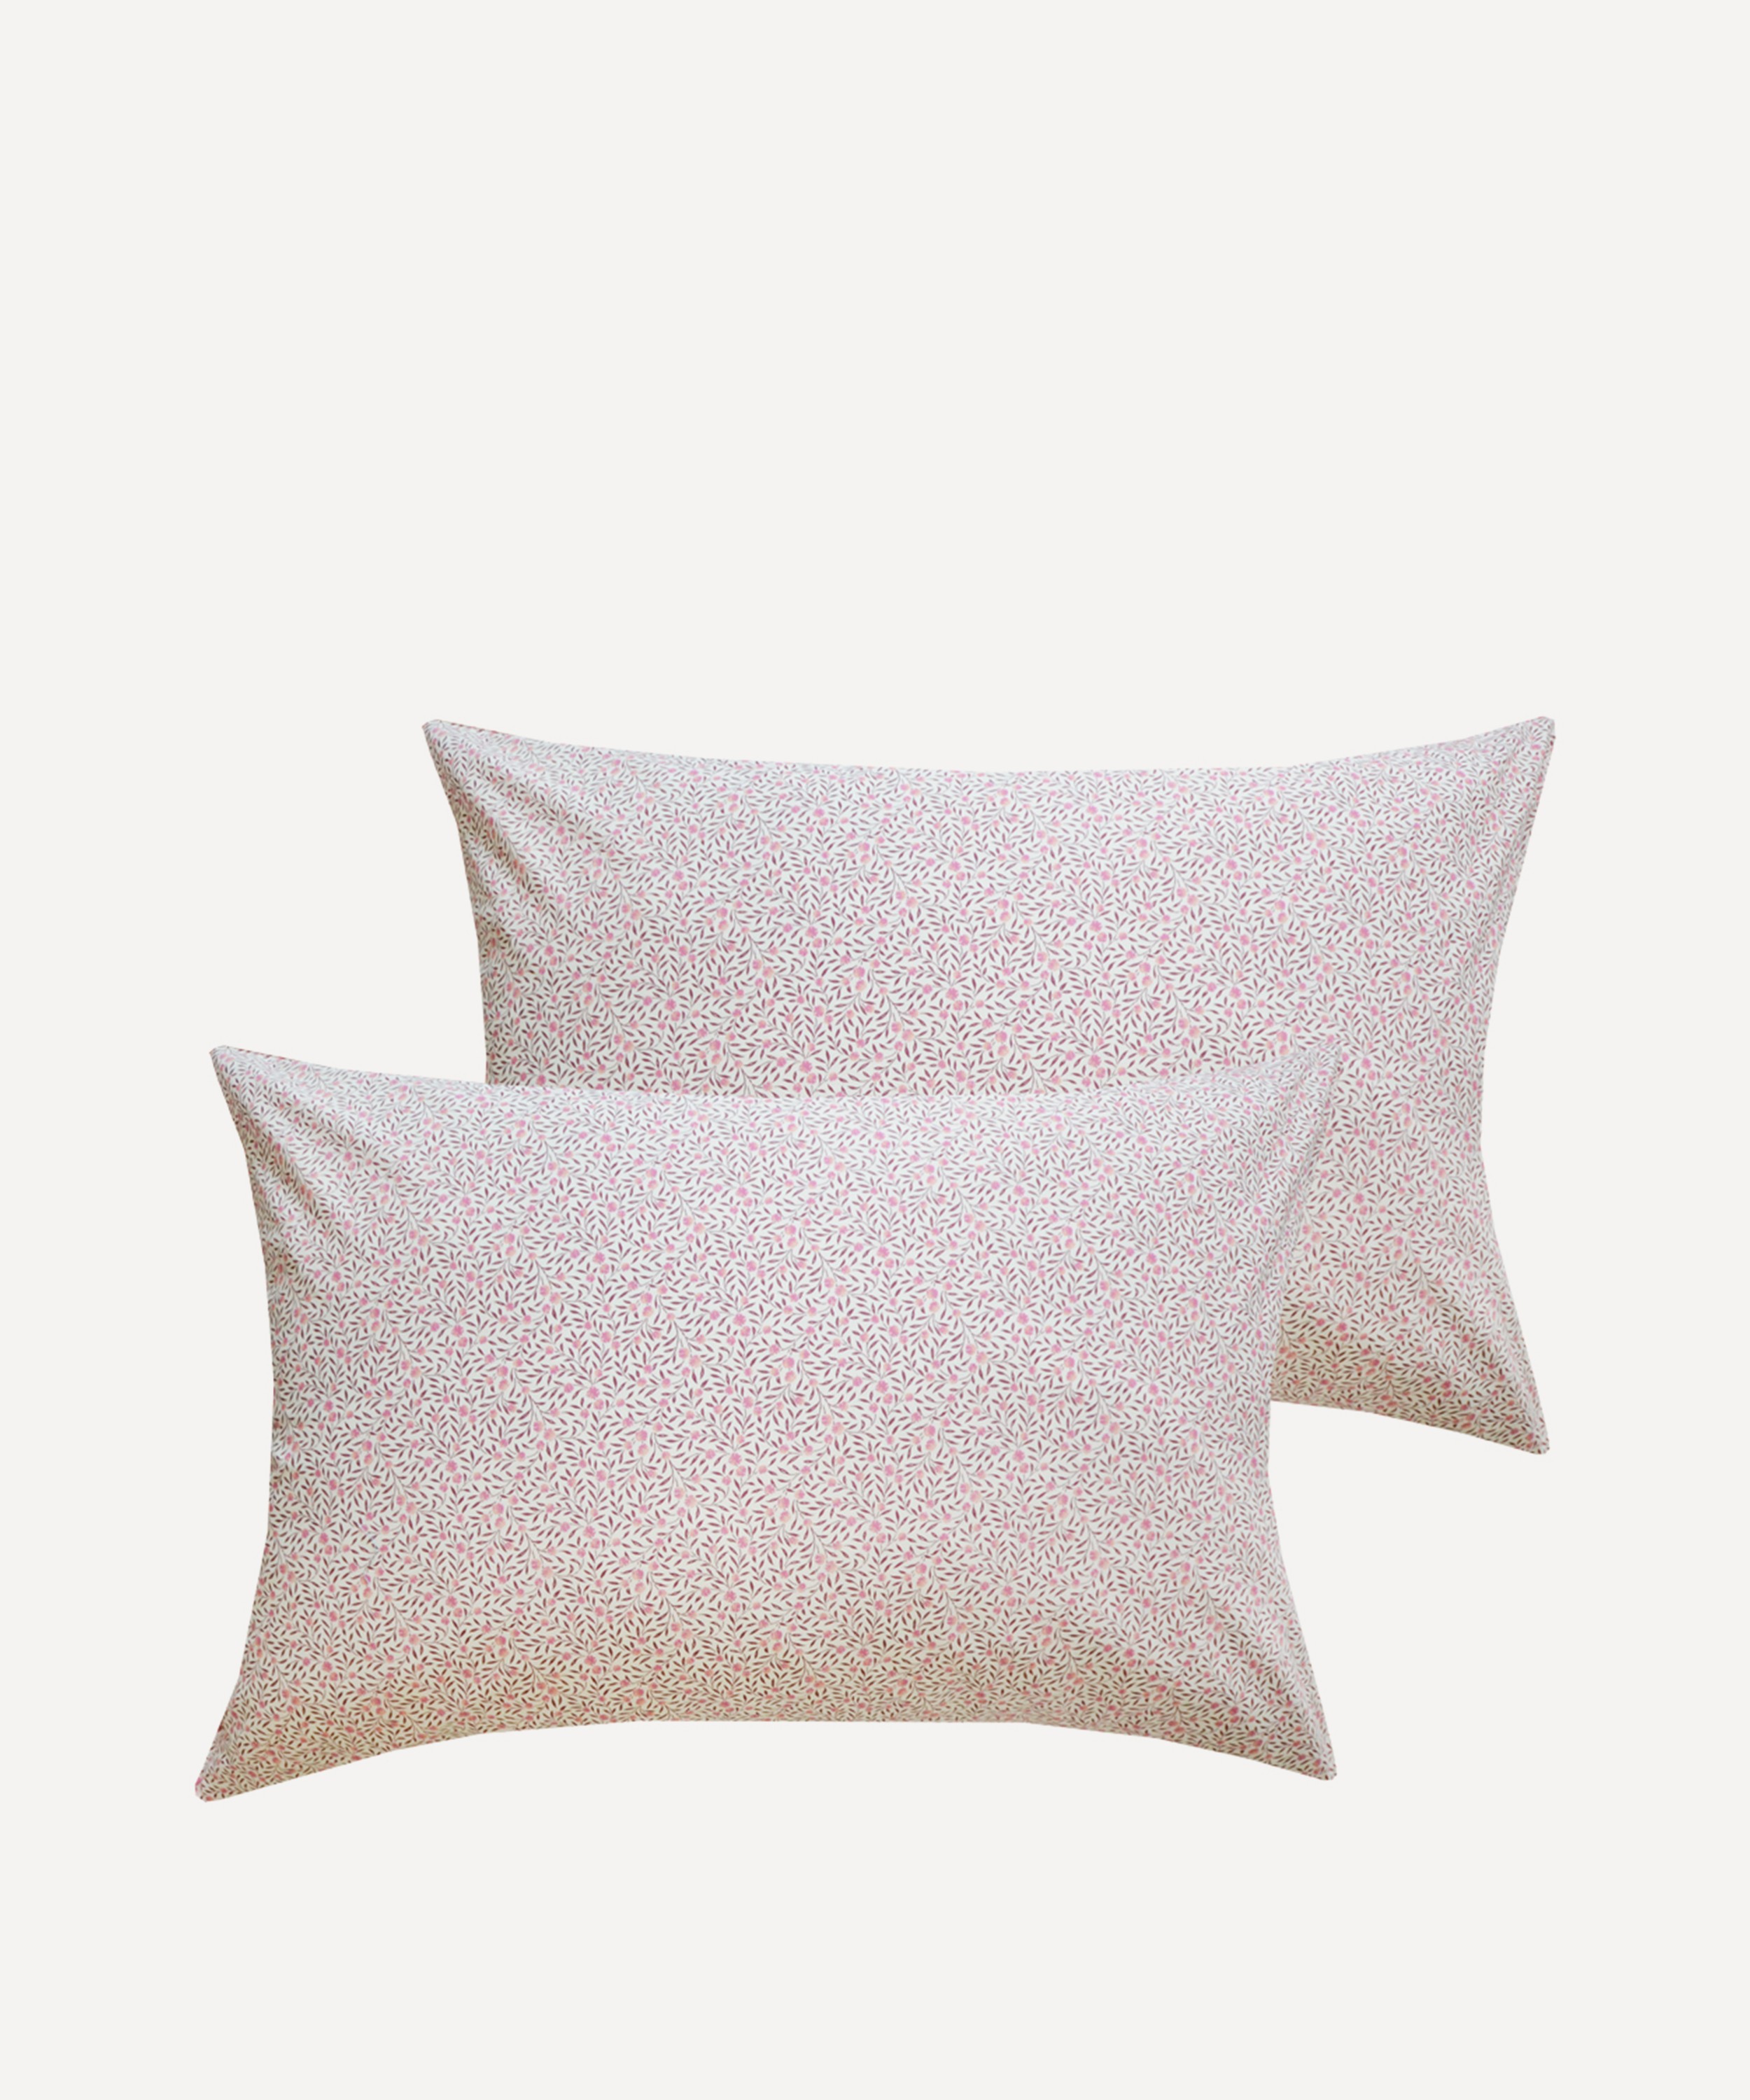 Coco & Wolf - Myrtle Cotton Pillowcases Set of Two